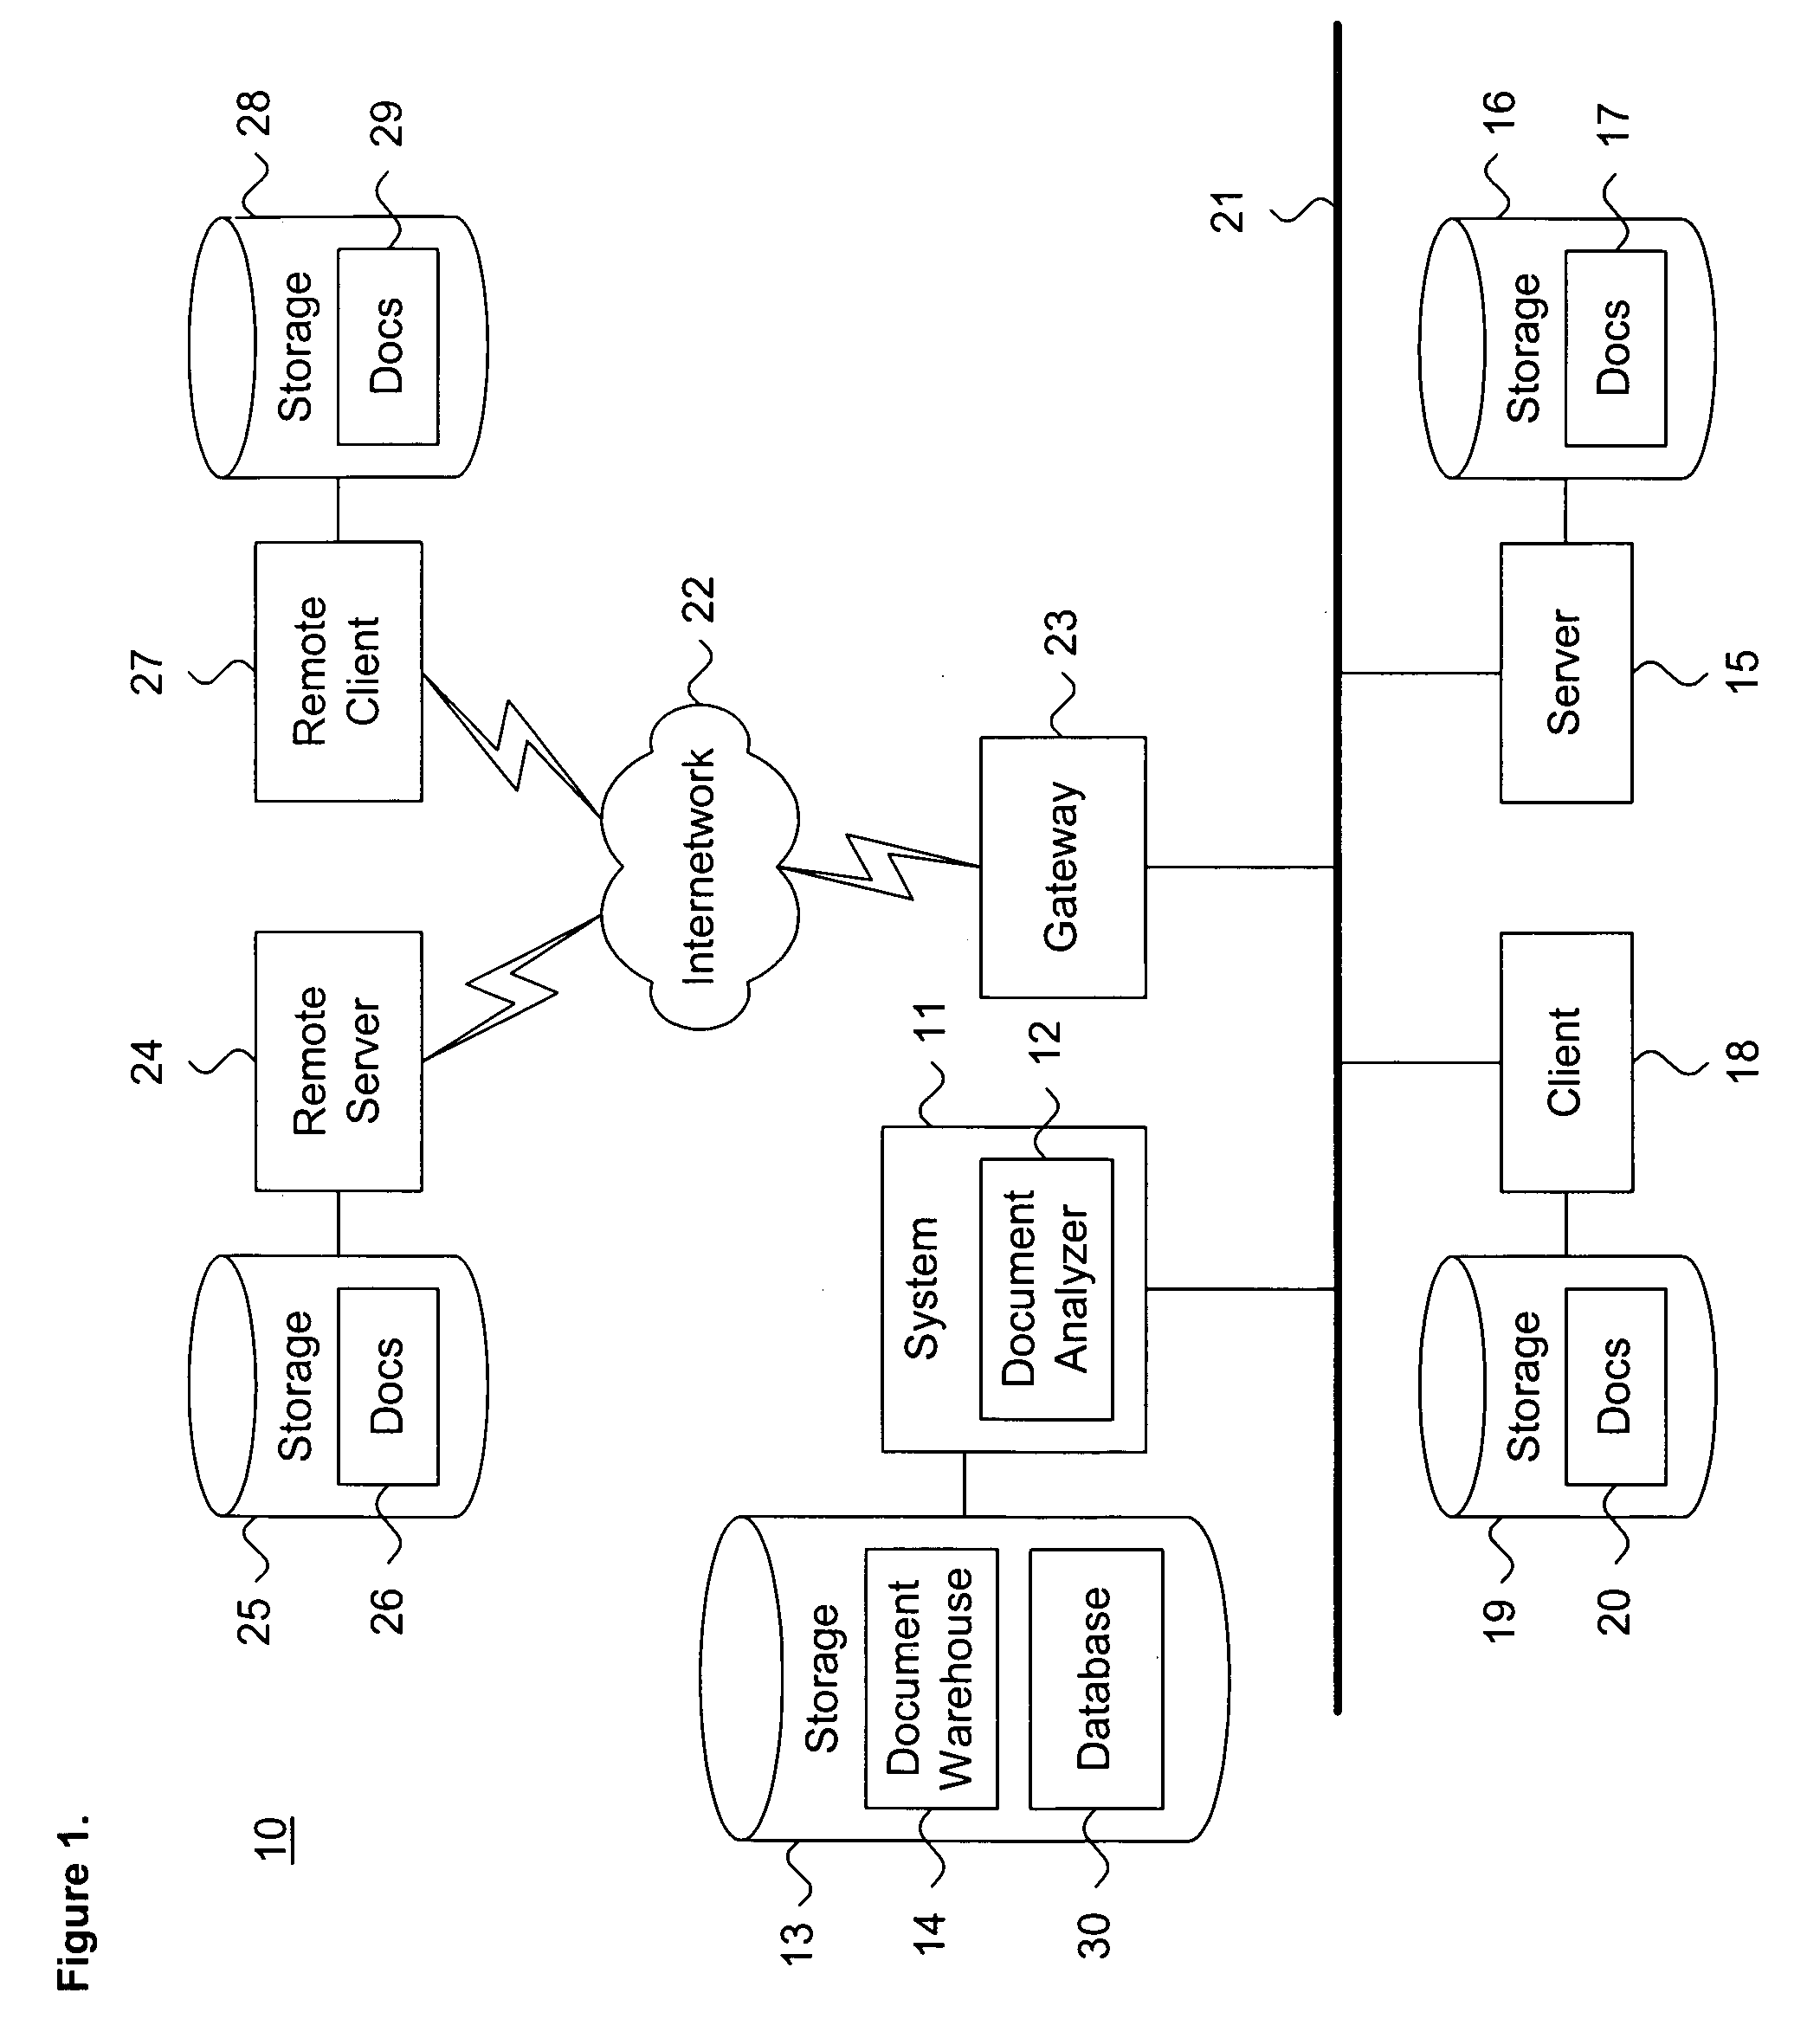 System and method for dynamically evaluating latent concepts in unstructured documents